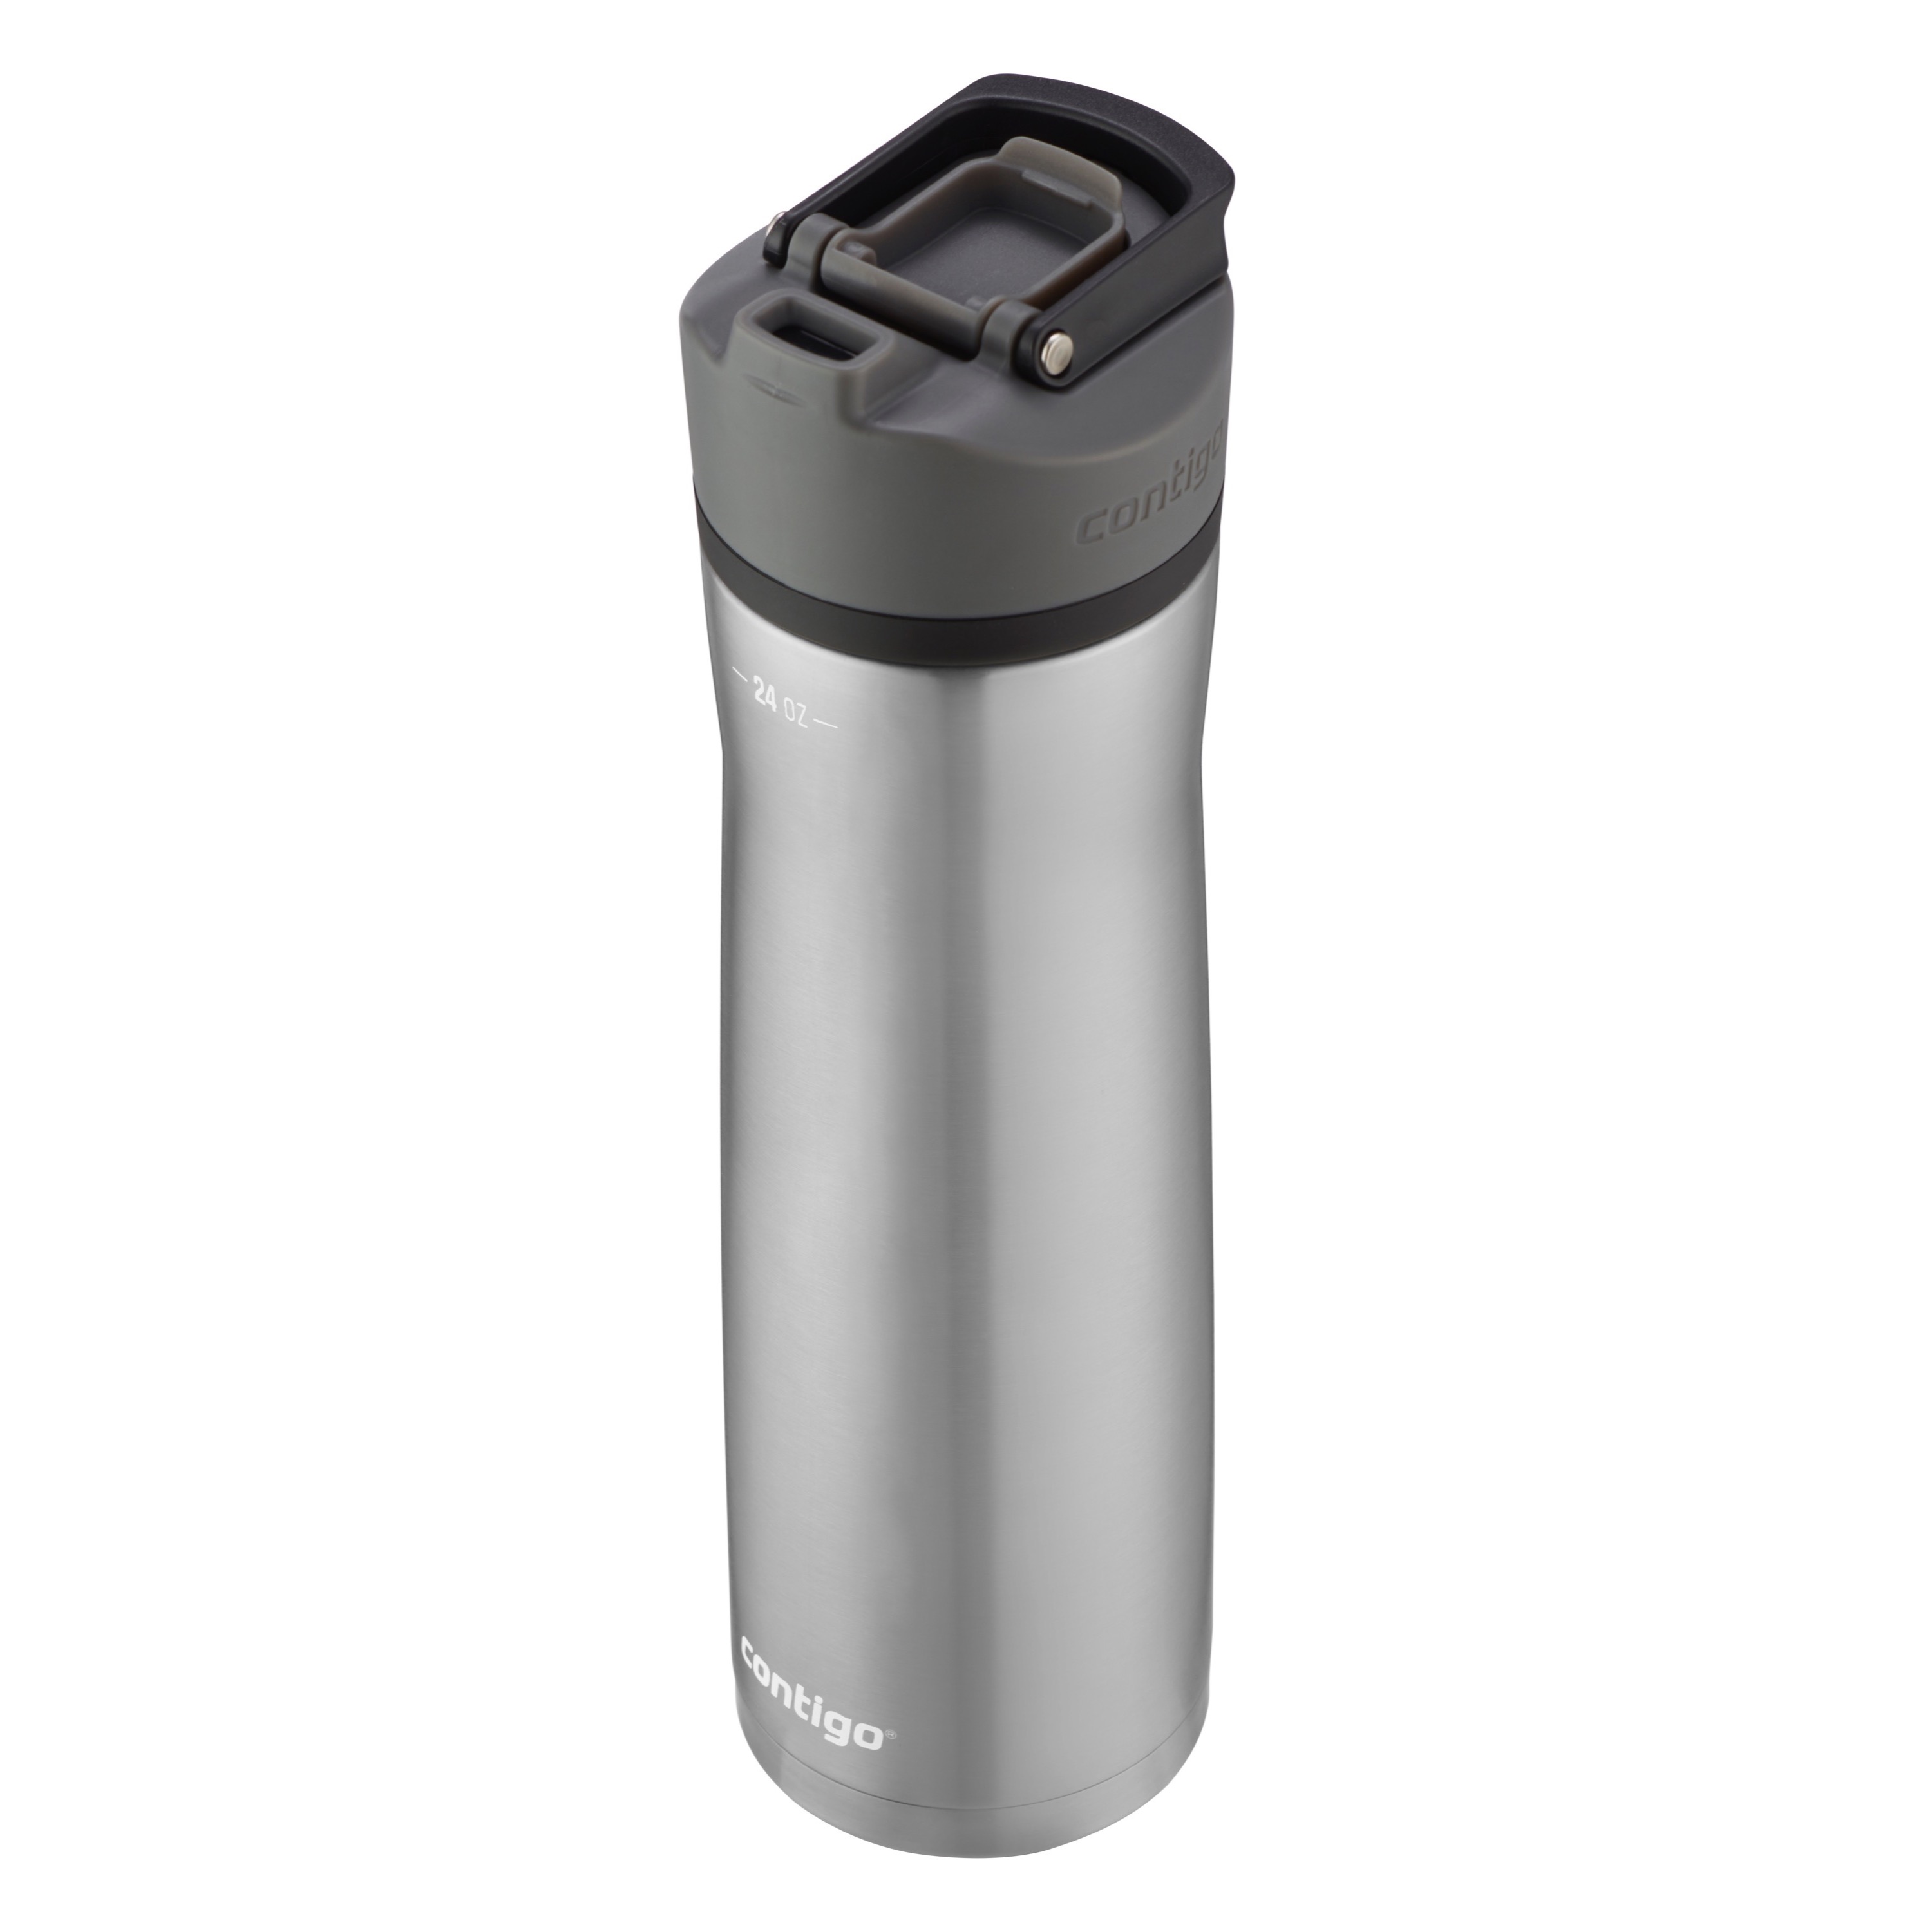 Contigo Cortland Chill 2.0 24 oz Silver, Gray and Licorice Solid Print Double Wall Vacuum Insulated Stainless Steel Water Bottle with Wide Mouth Lid - image 8 of 9